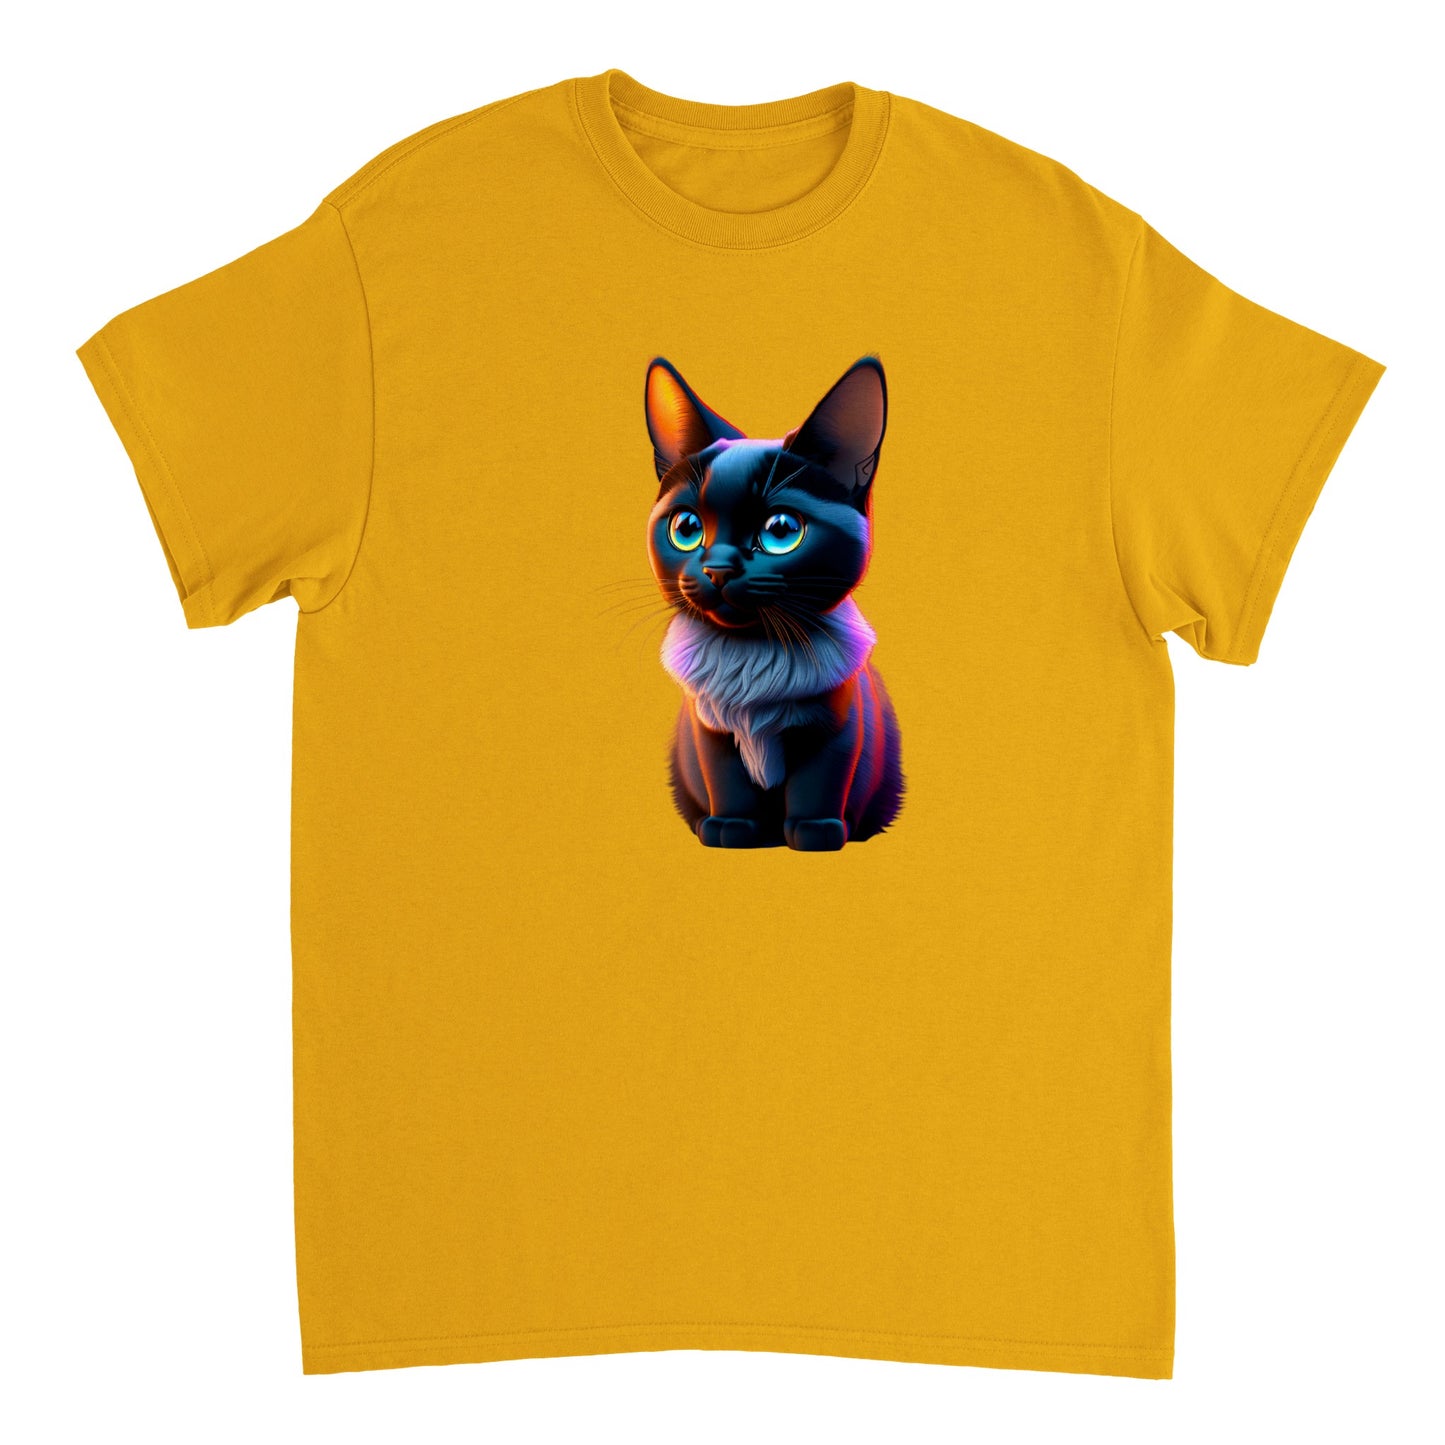 Adorable, Cool, Cute Cats and Kittens Toy - Heavyweight Unisex Crewneck T-shirt 43